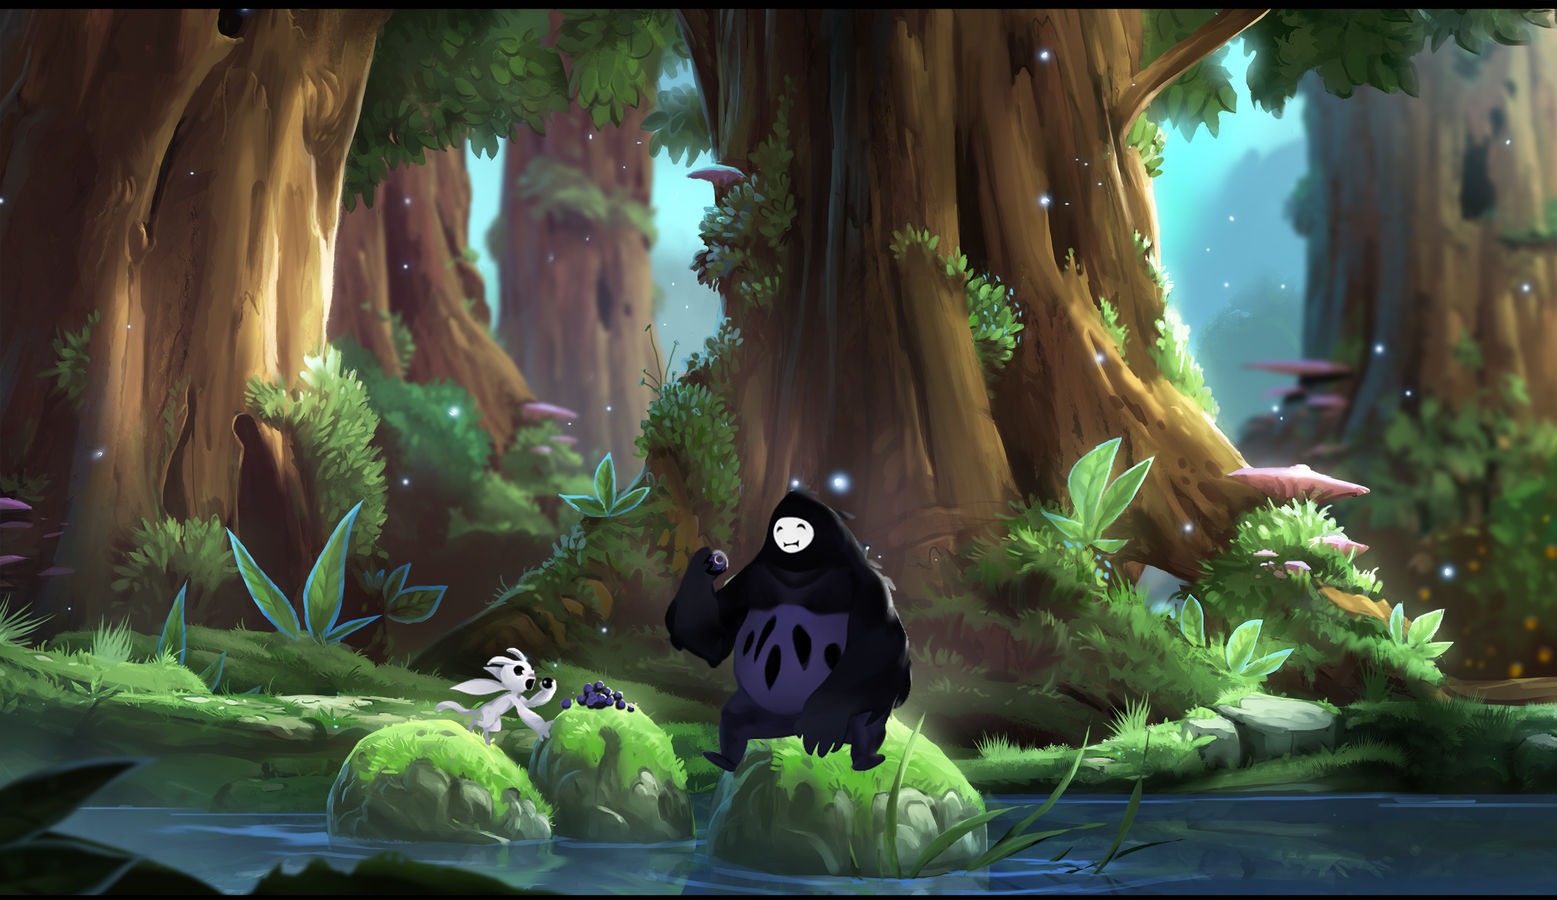 Скриншоты игры Ori and the Blind Forest.